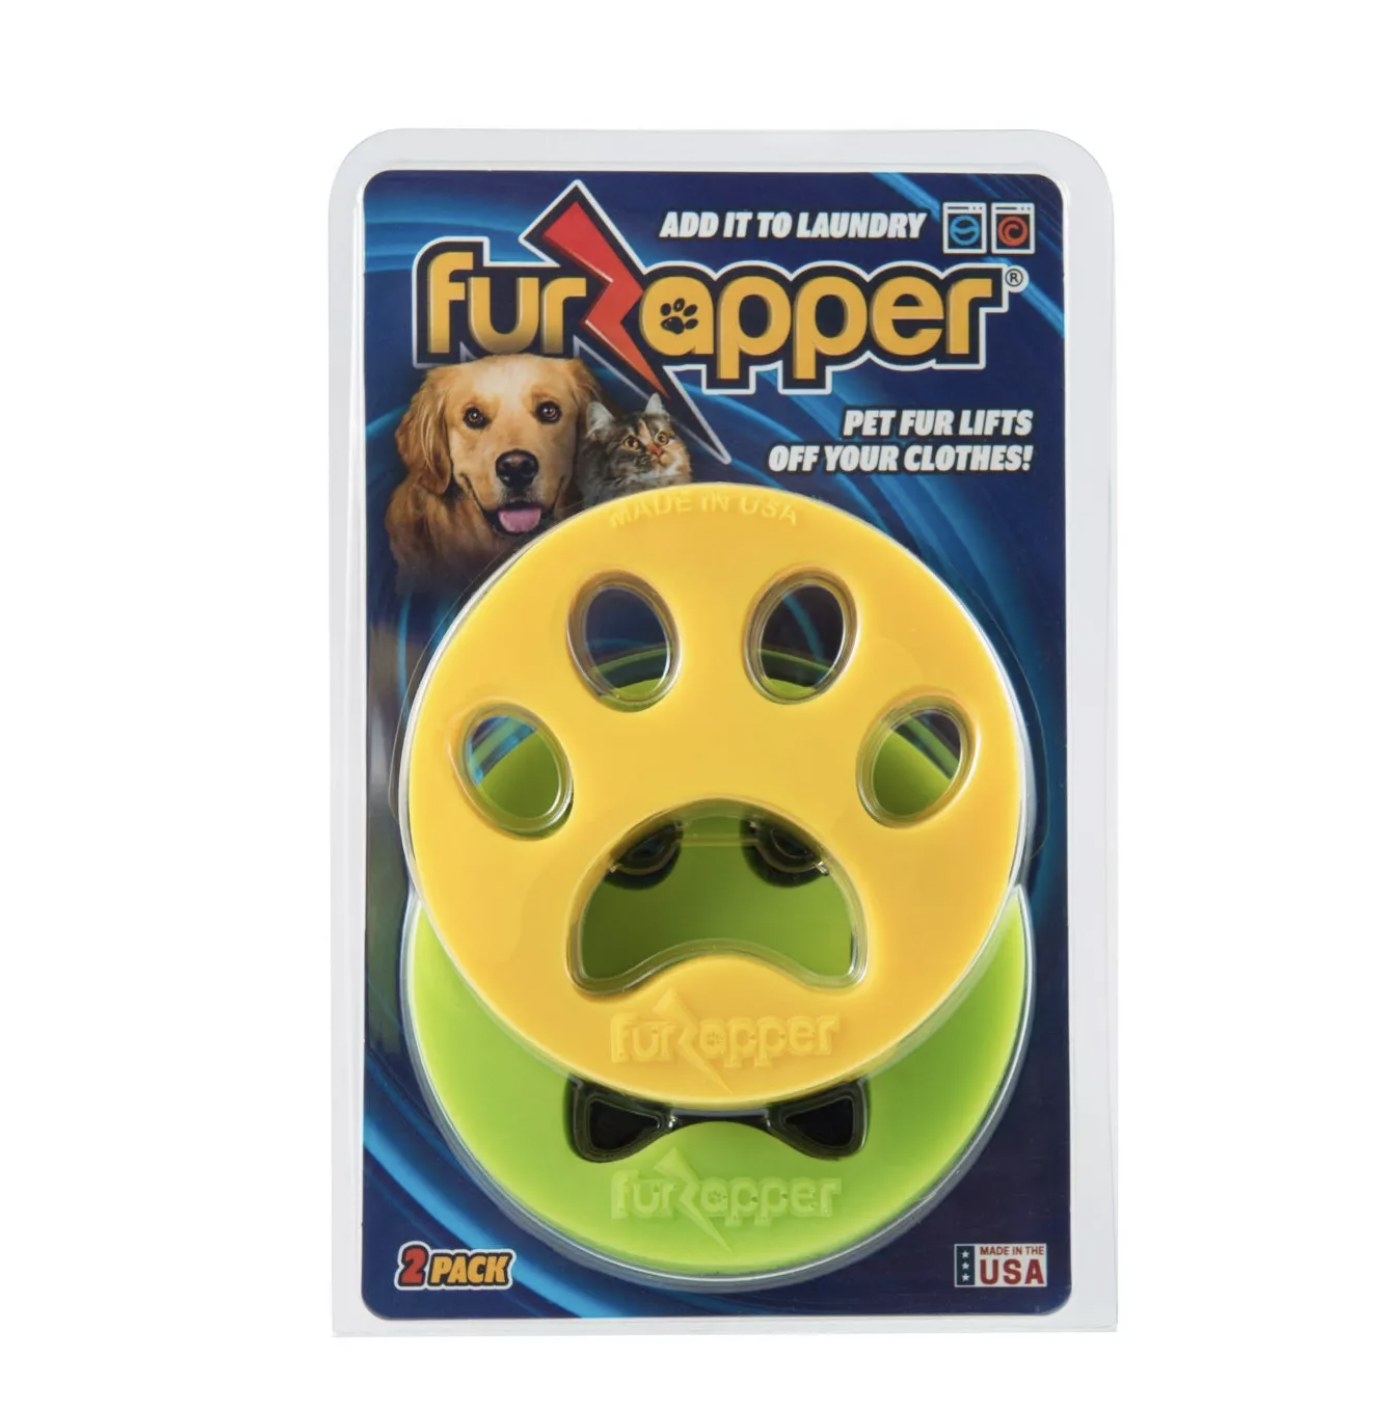 The two-pack of Furzappers